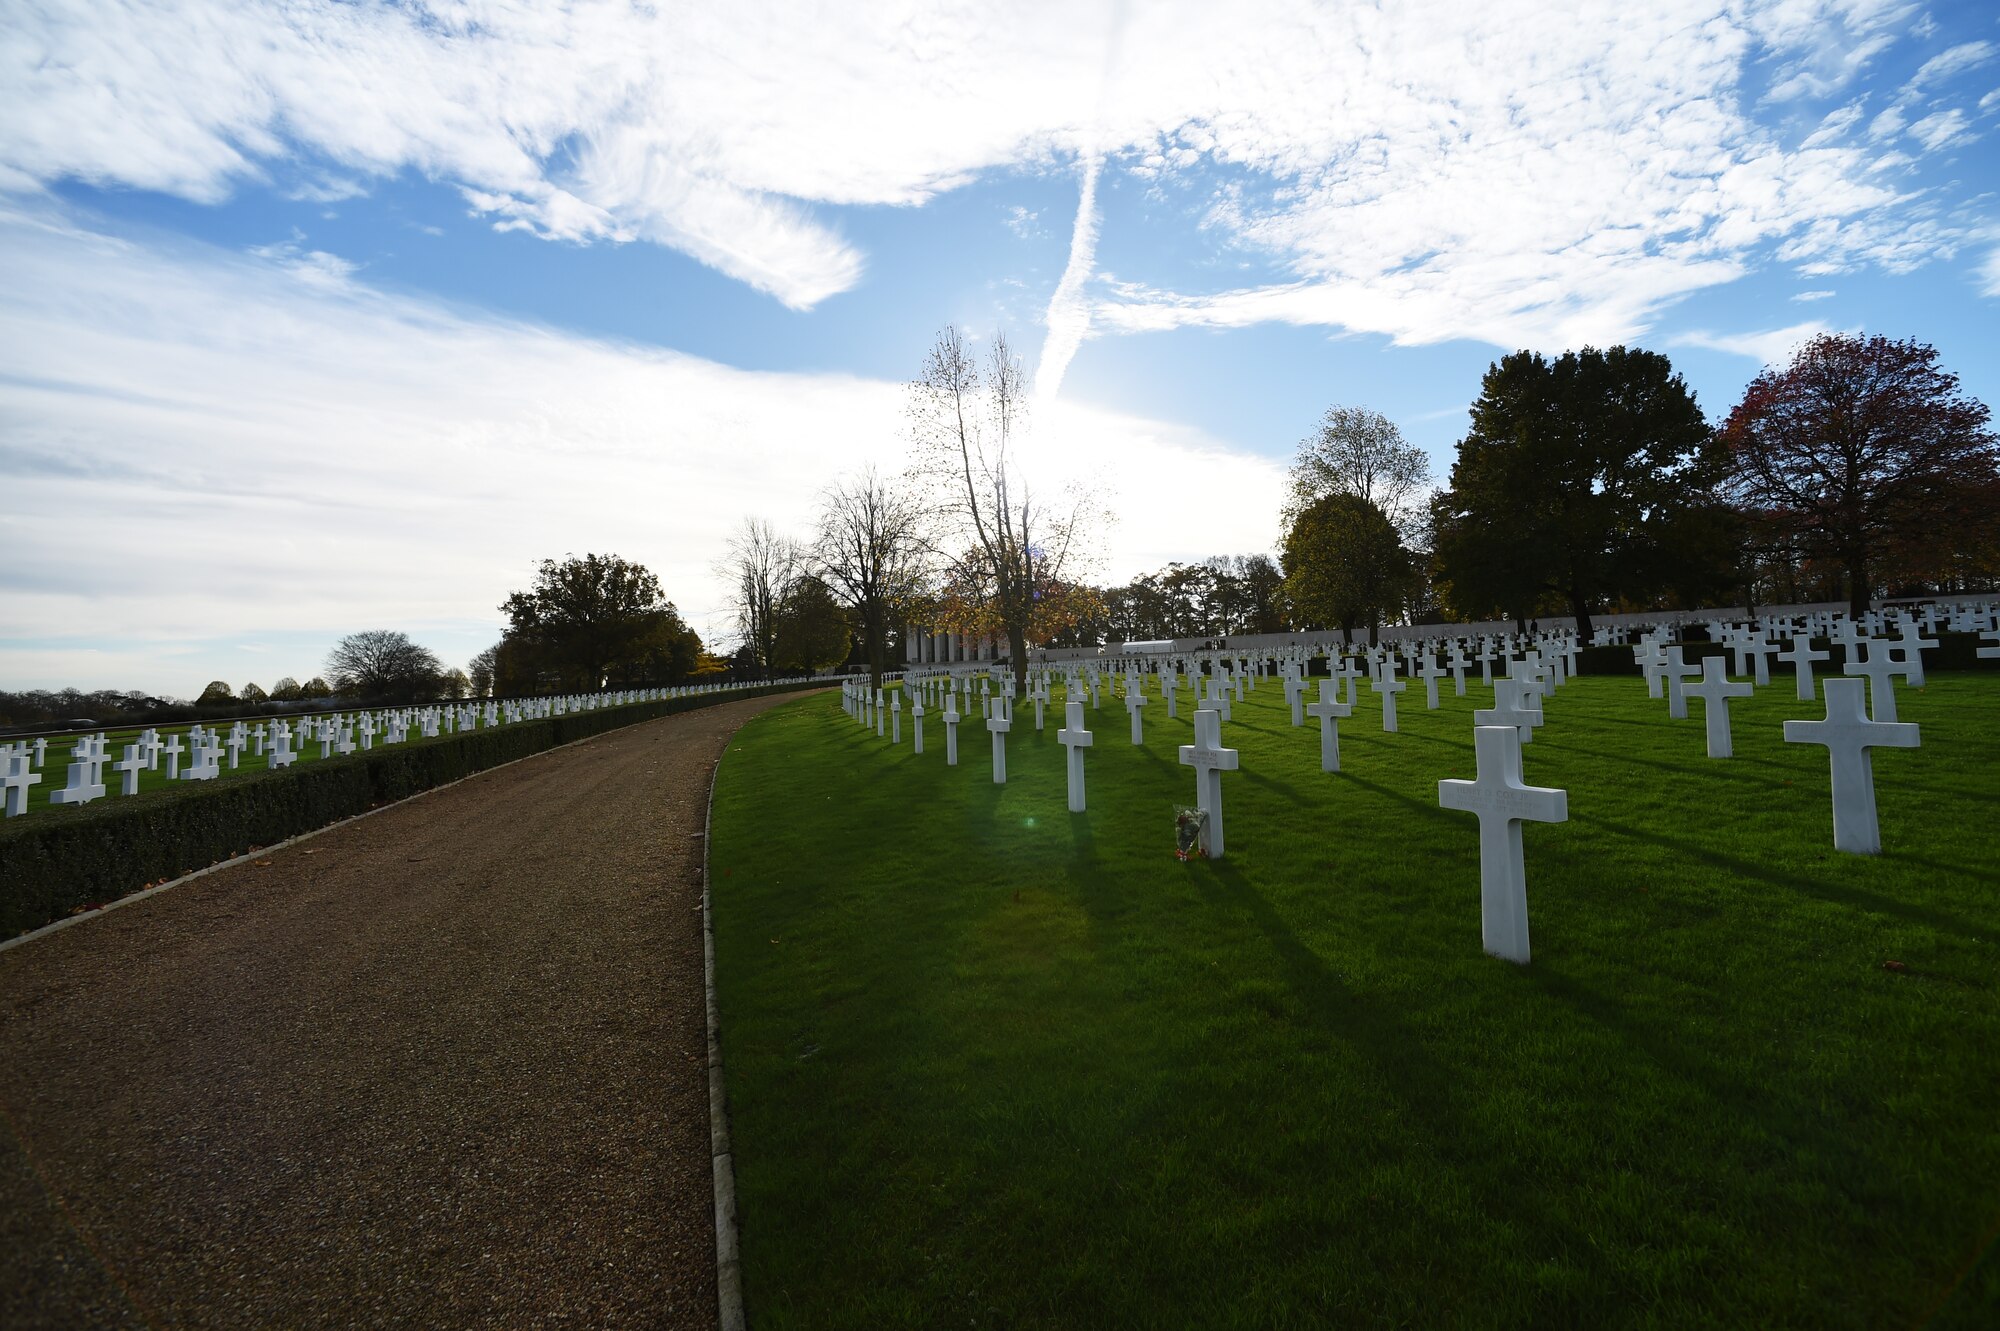 Rows of tombstones line the vast expanse at Cambridge American Cemetery, United Kingdom, Nov. 11, 2015. The cemetery was dedicated in 1956 as the final resting place of 3,812 American Service members. (U.S. Air Force photo by Staff Sgt. Jarad A. Denton/Released)